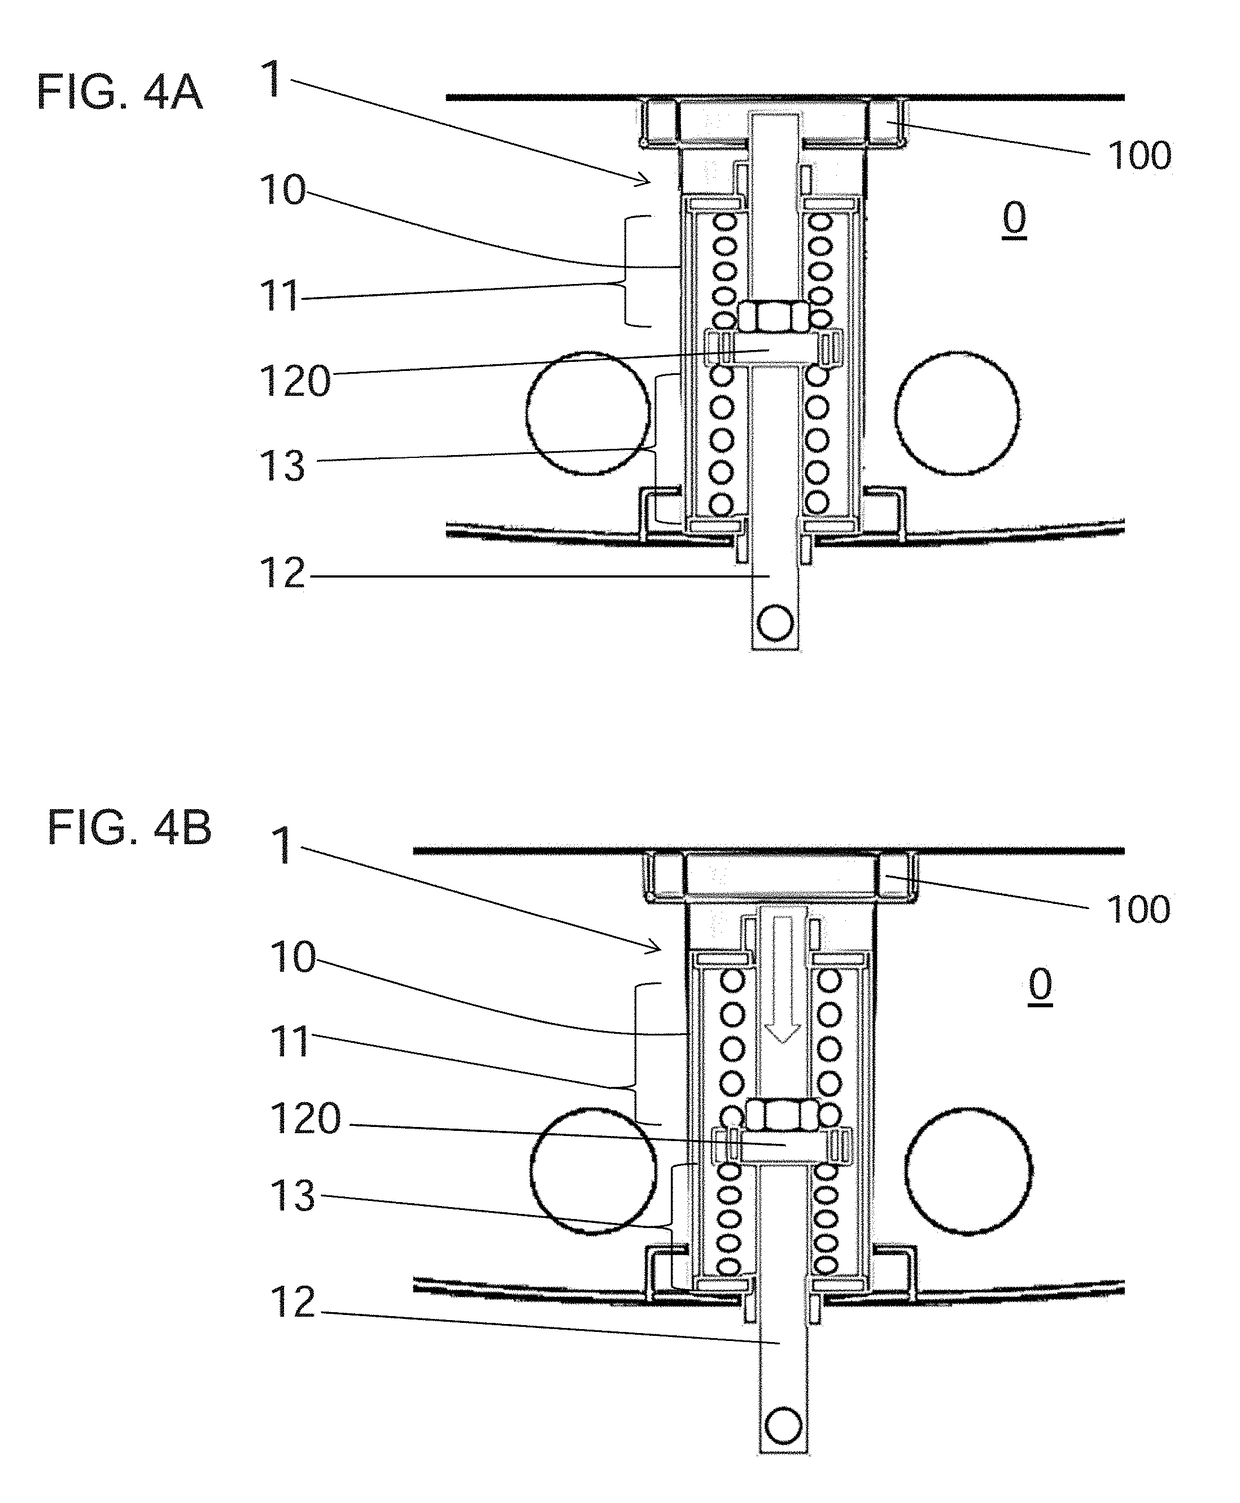 Load hook substructure